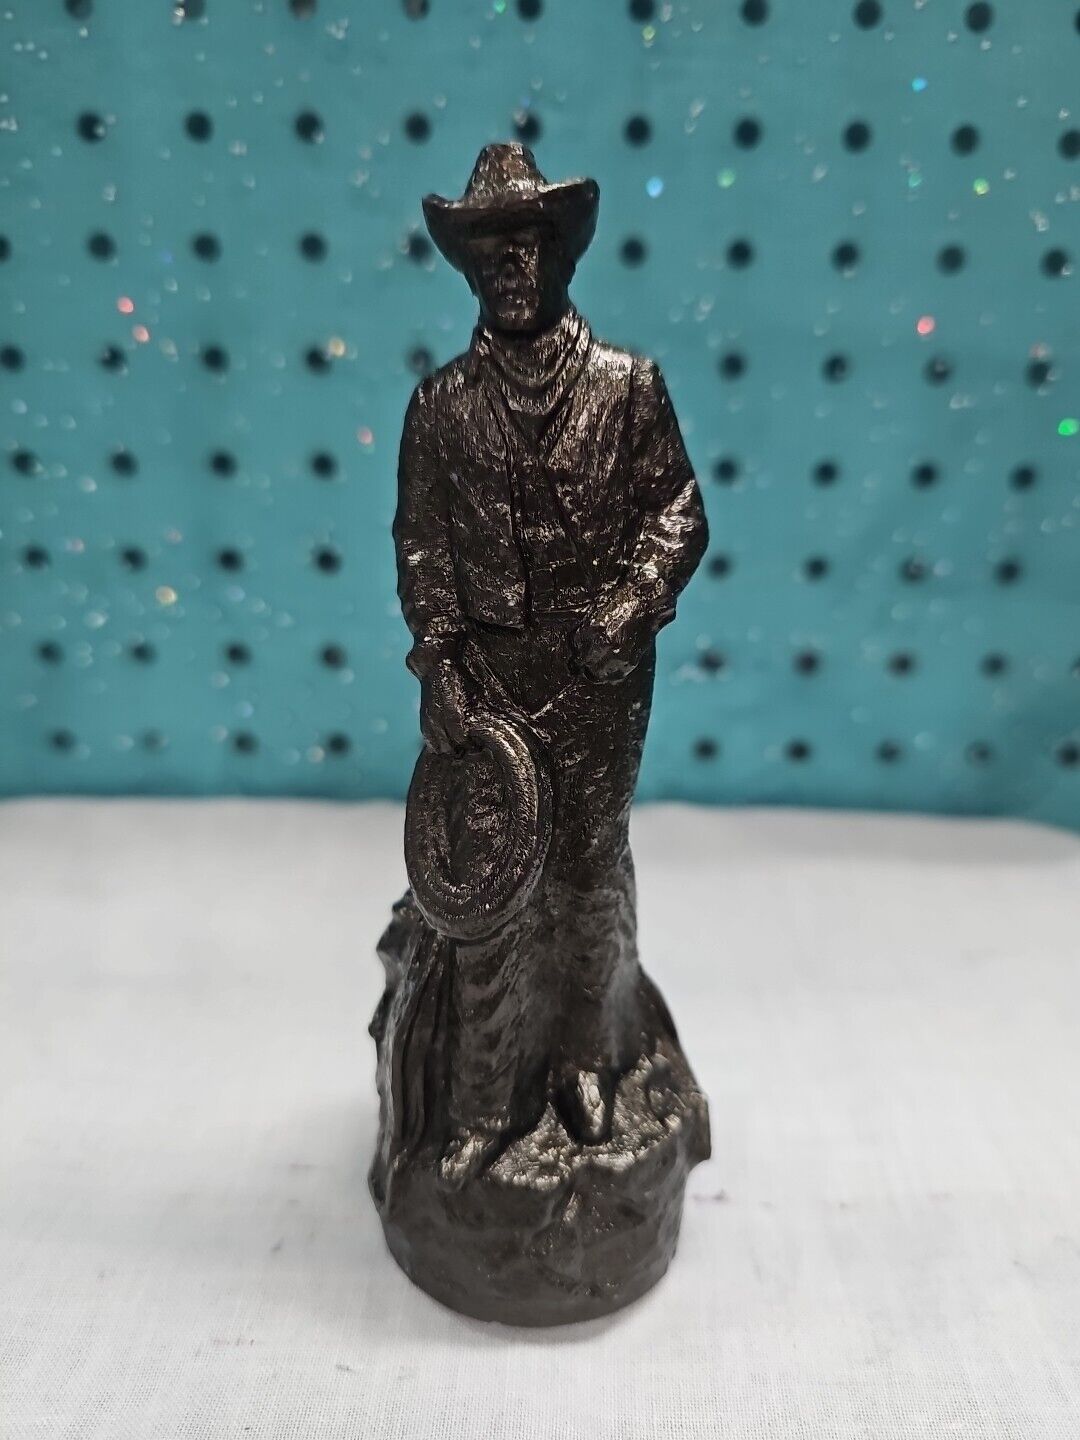 6 1/2 Inch Stetson Cowboy Figurine,  Pewter Color Finished, Stamped Stetson